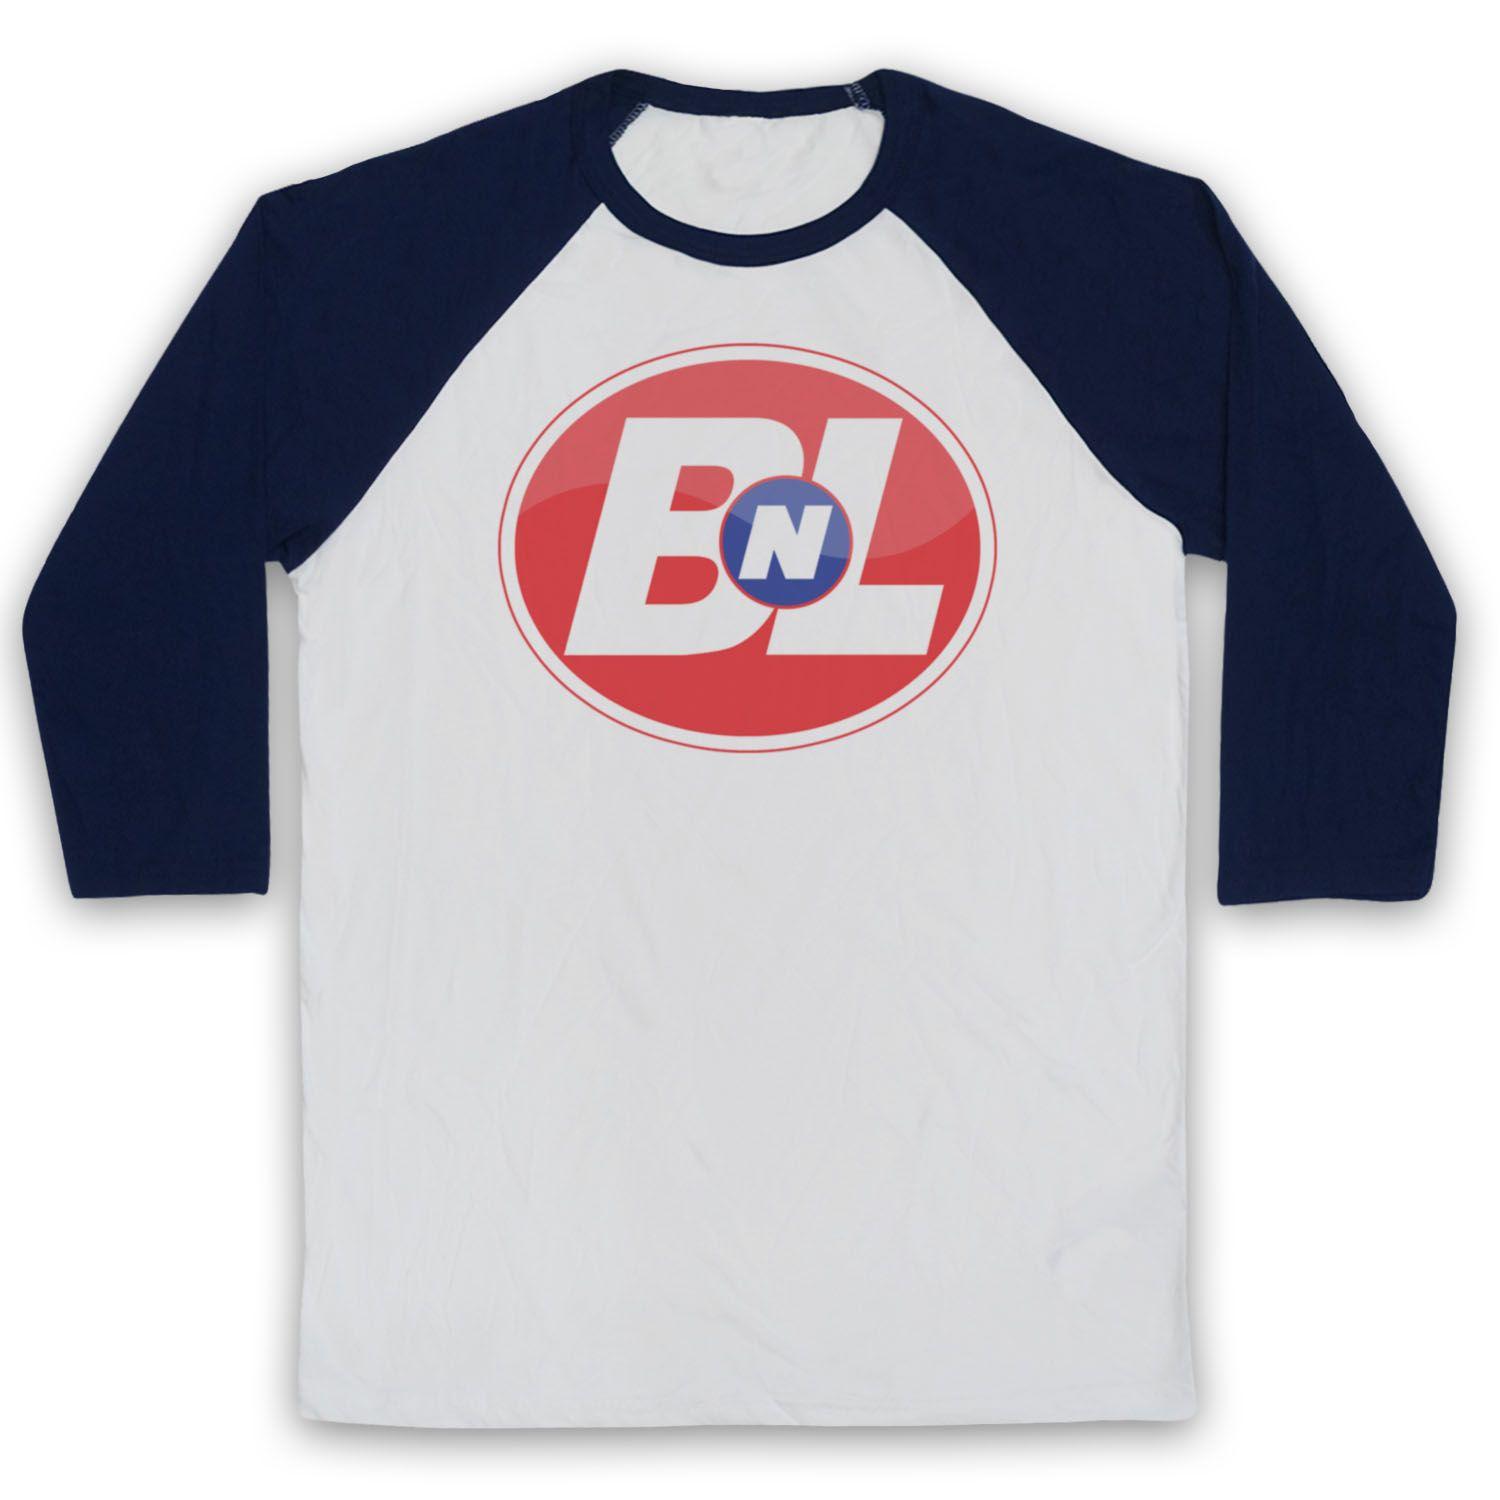 Blue and White E Logo - BUY N LARGE UNOFFICIAL WALL E LOGO SCI FI KIDS FILM 3 4 SLEEVE